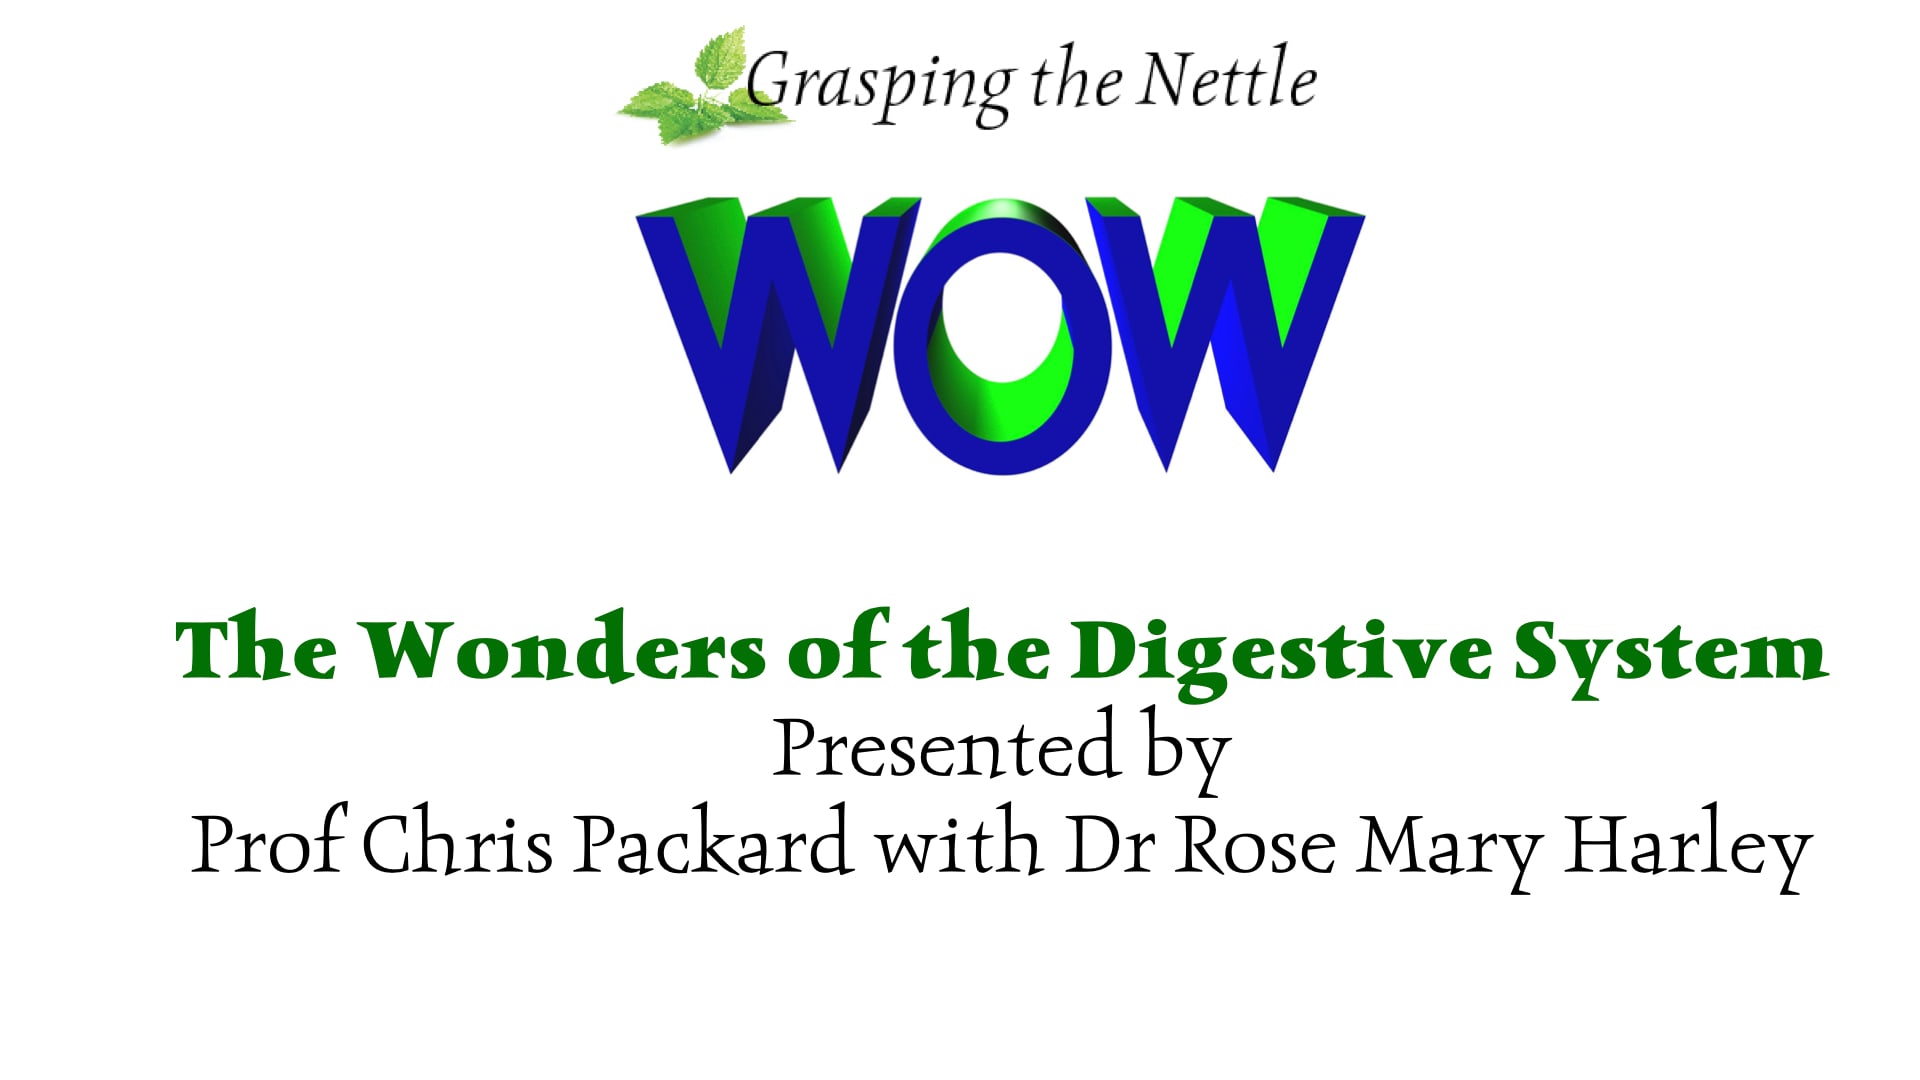 The Wonders of the Digestive System